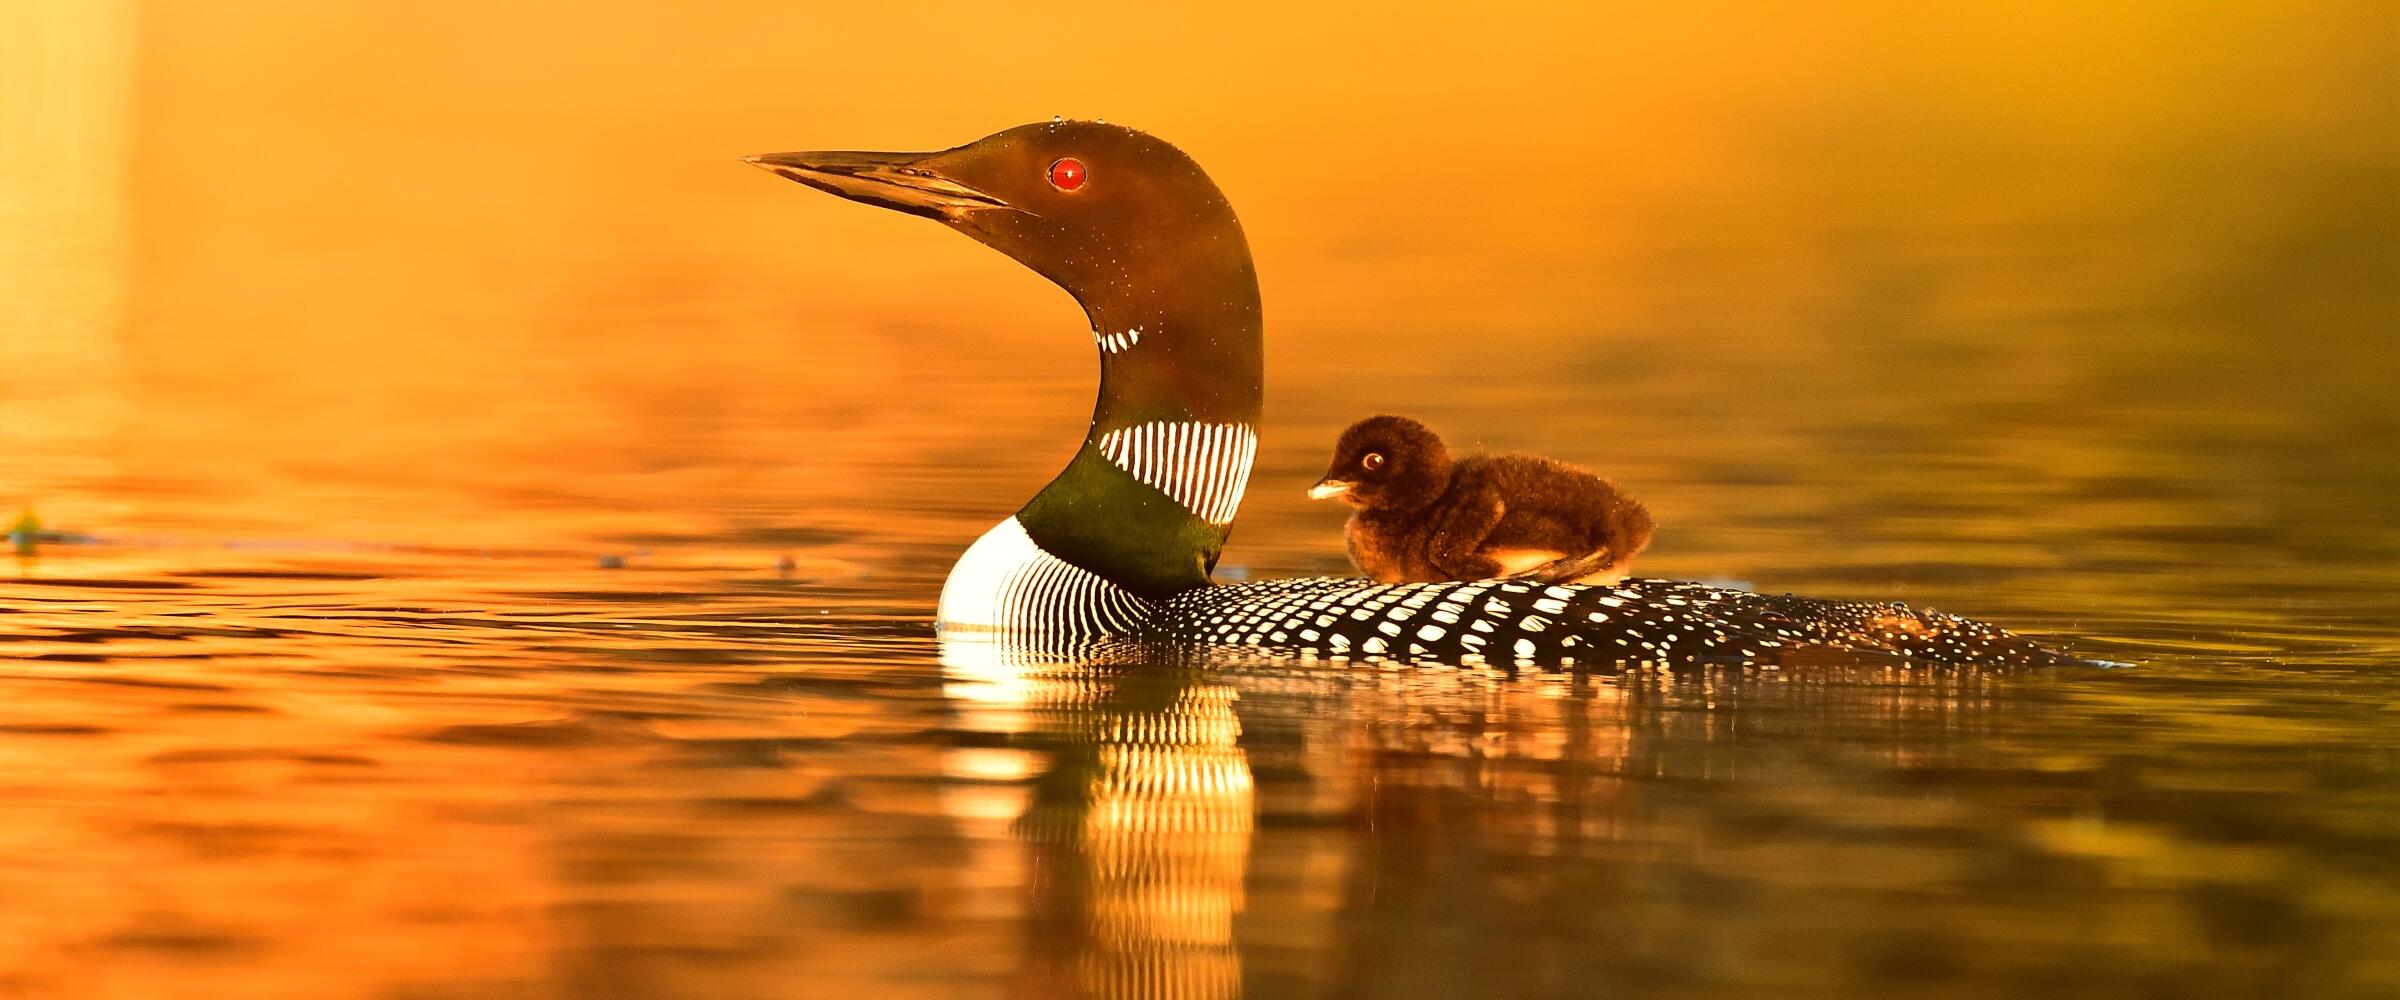 A loon chick rides on its parents back through the water. The image has a soft golden hour glow.